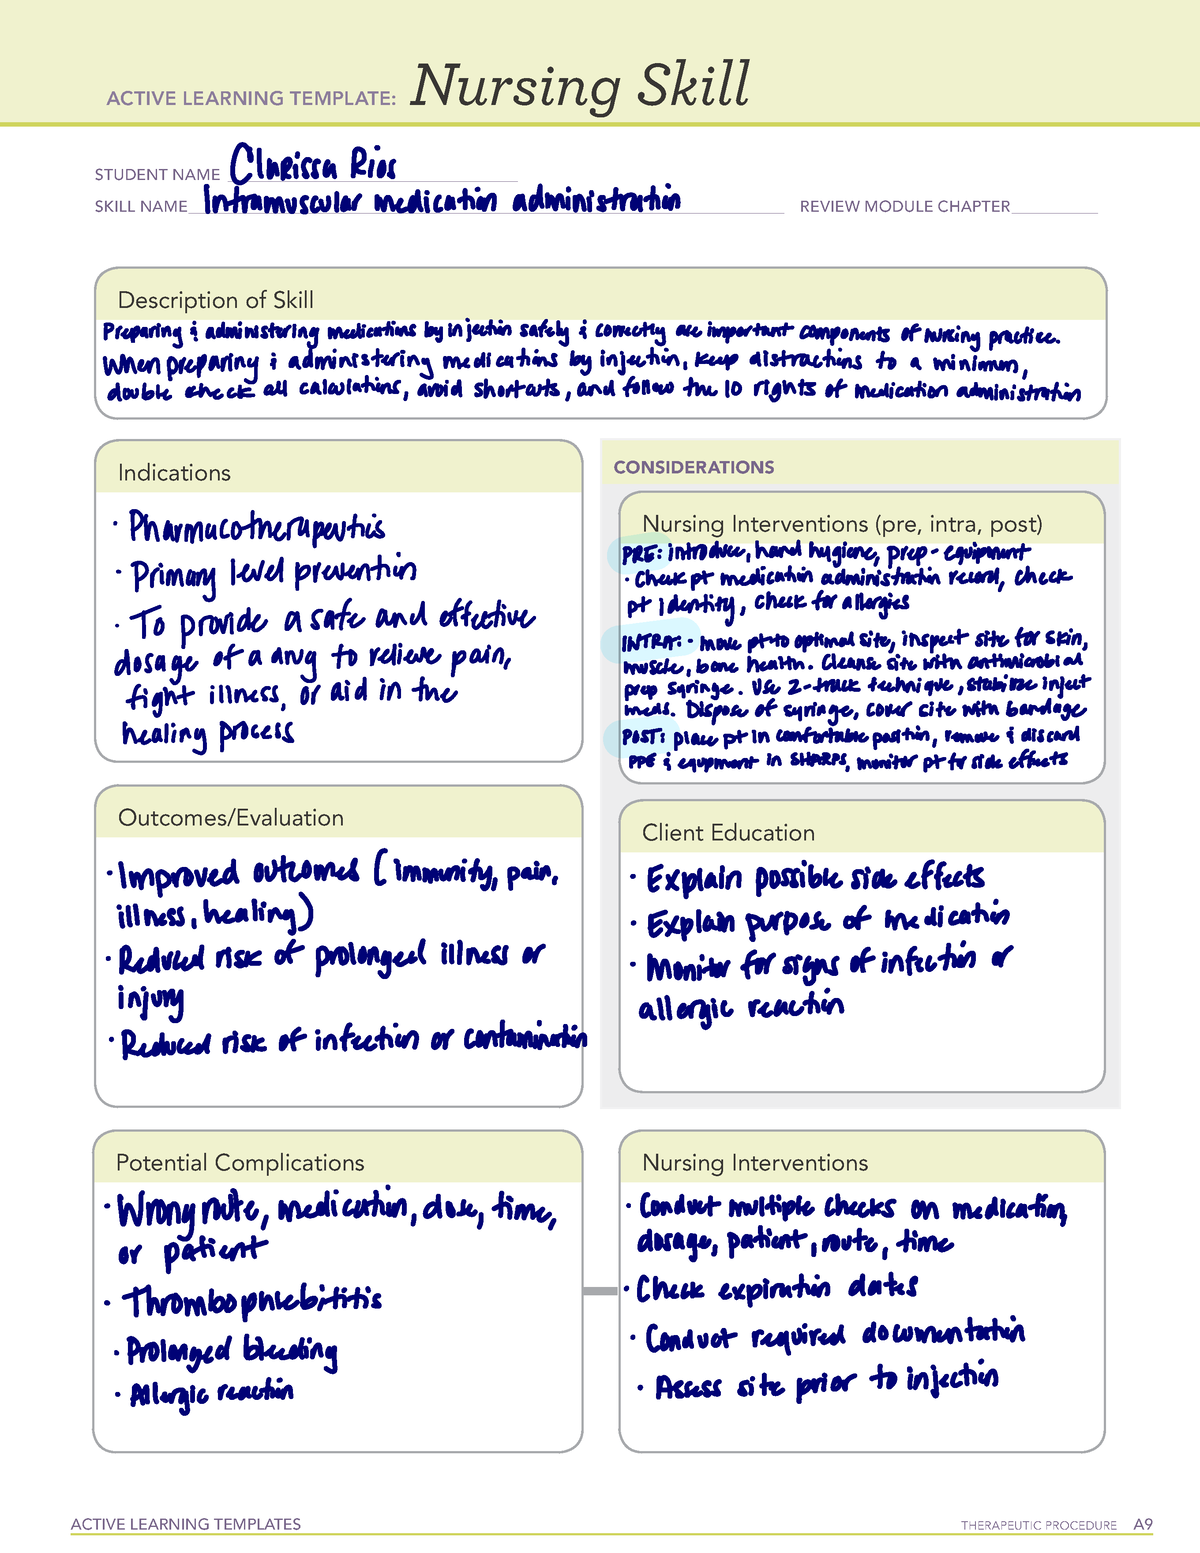 nursing-skill-im-administration-active-learning-templates-therapeutic-procedure-a-nursing